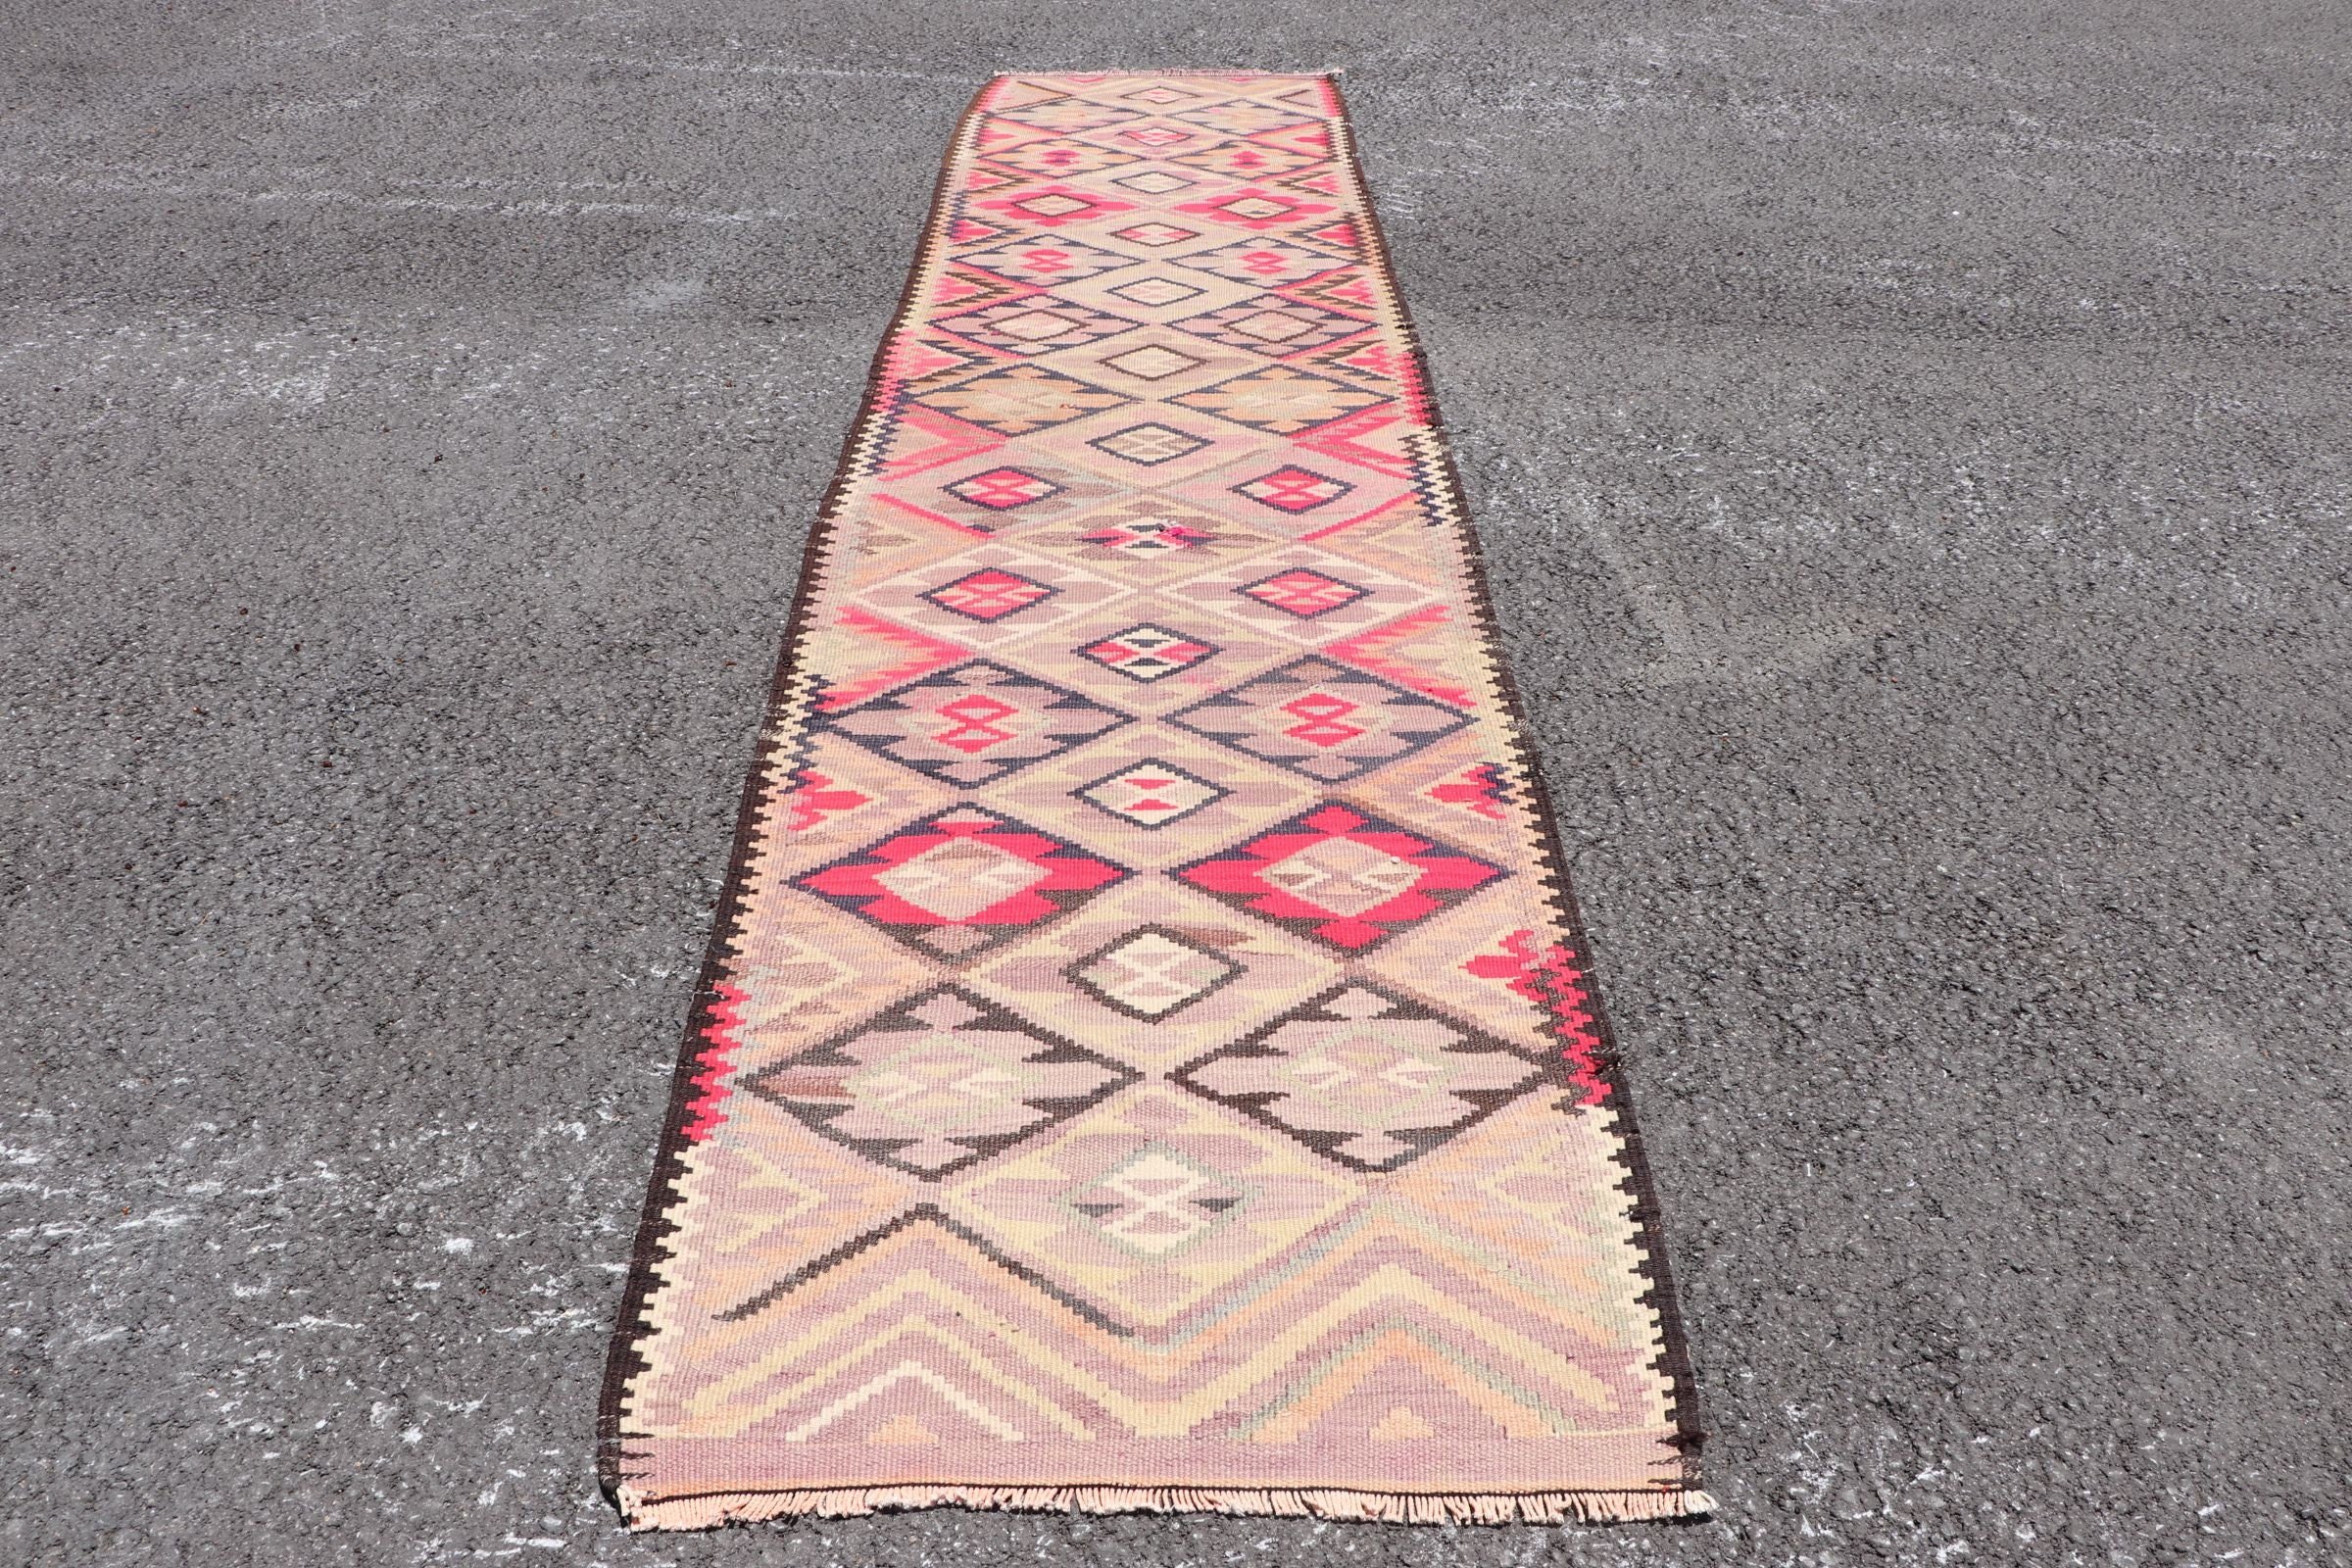 3x13 ft Runner Rugs, Corridor Rug, Turkish Rug, Pink Antique Rugs, Home Decor Rug, Kitchen Rug, Wool Rugs, Rugs for Kitchen, Vintage Rugs